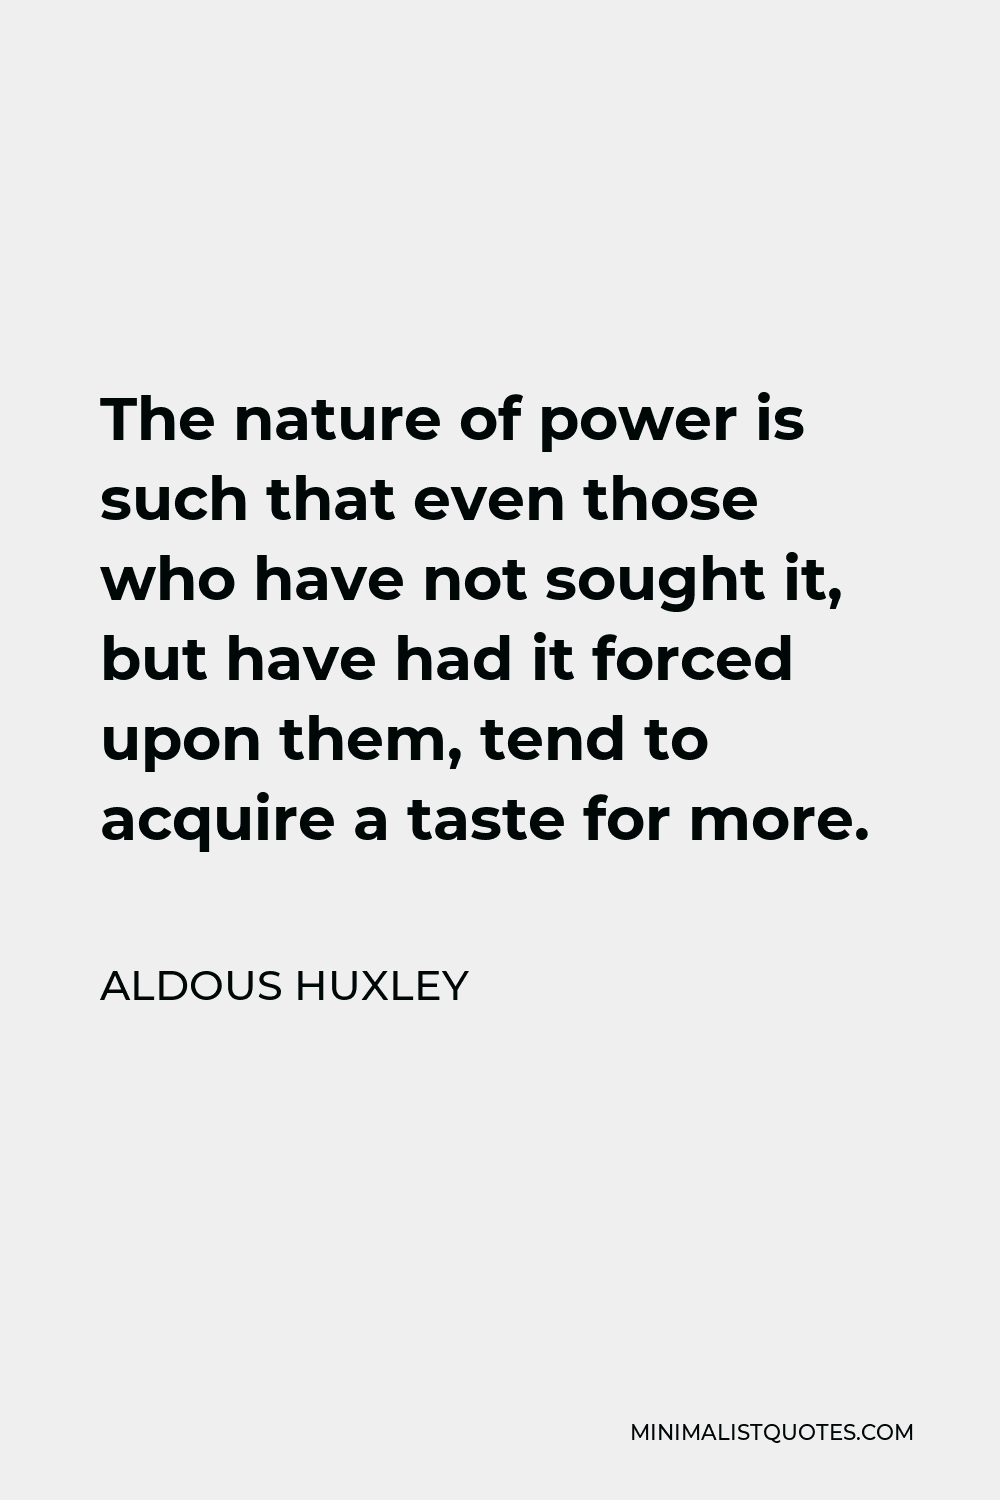 Aldous Huxley Quote - The nature of power is such that even those who have not sought it, but have had it forced upon them, tend to acquire a taste for more.